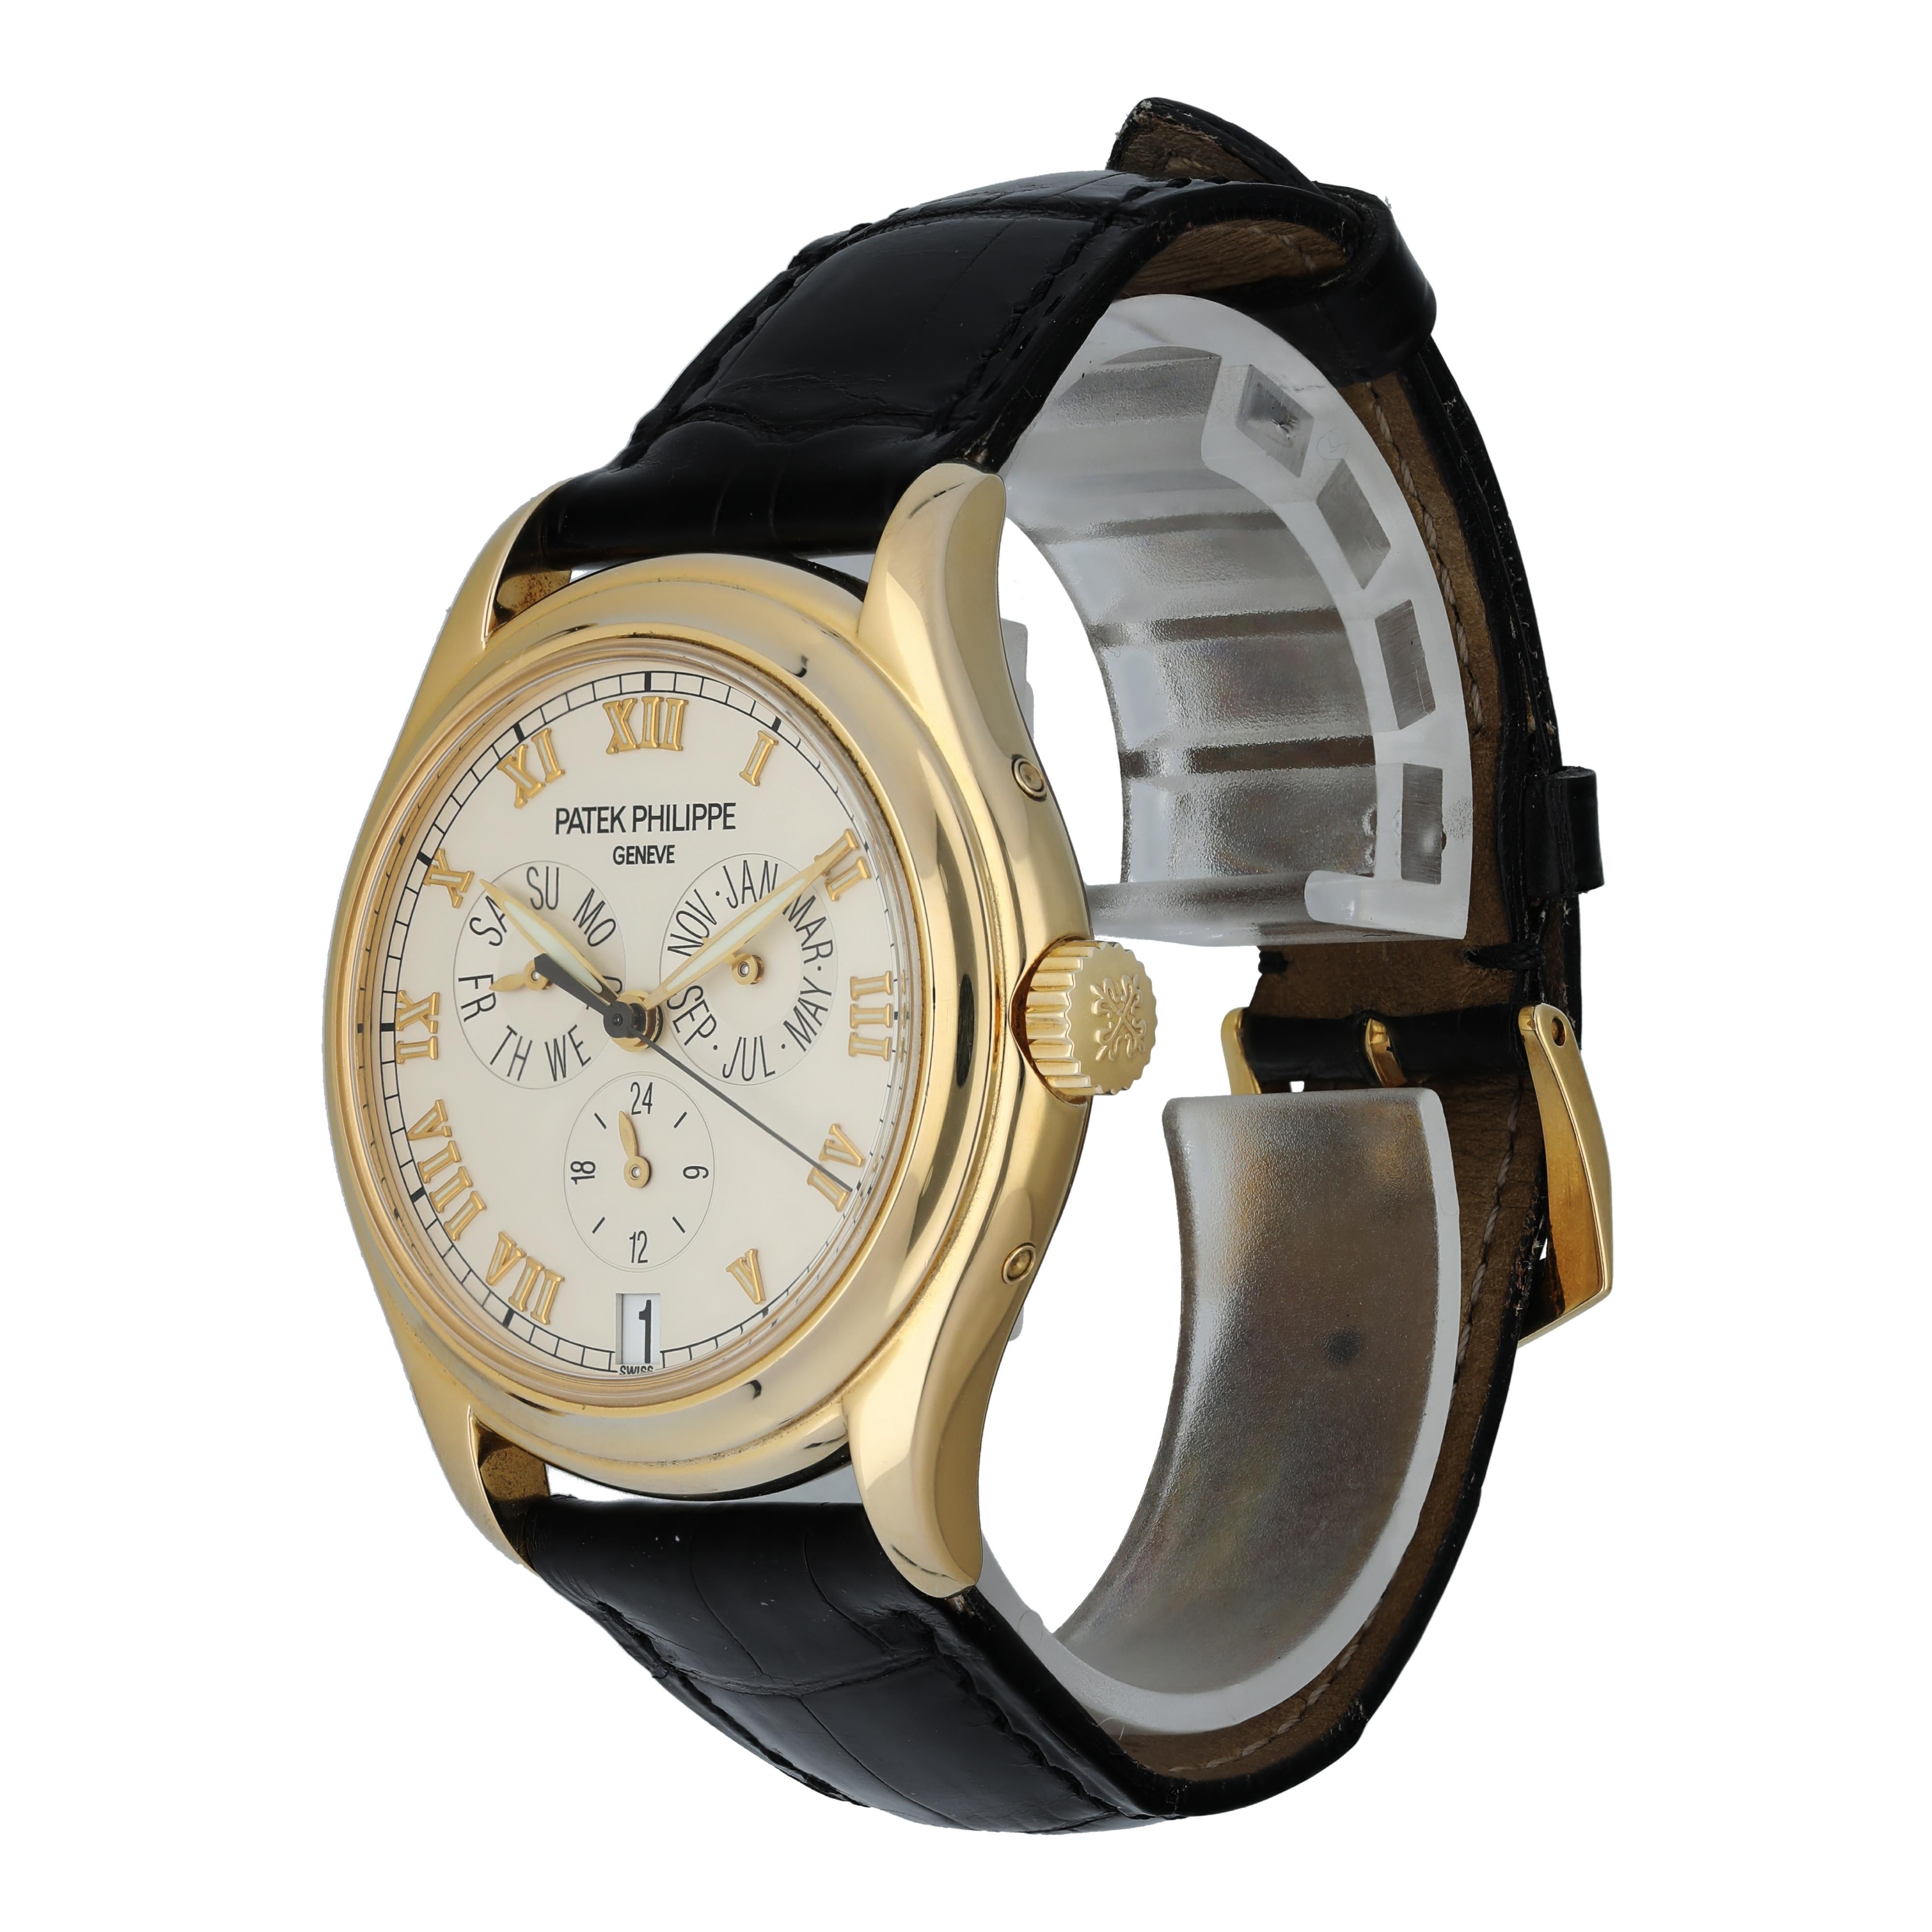 Patek Philippe Annual Calendar 5035 Men's Watch.
37mm 18k Yellow gold case. 
Yellow Gold Stationary bezel. 
Off-White dial with gold hands and Roman numeral hour markers. 
Minute markers on the outer dial. 
Date display at the 6 o'clock position.